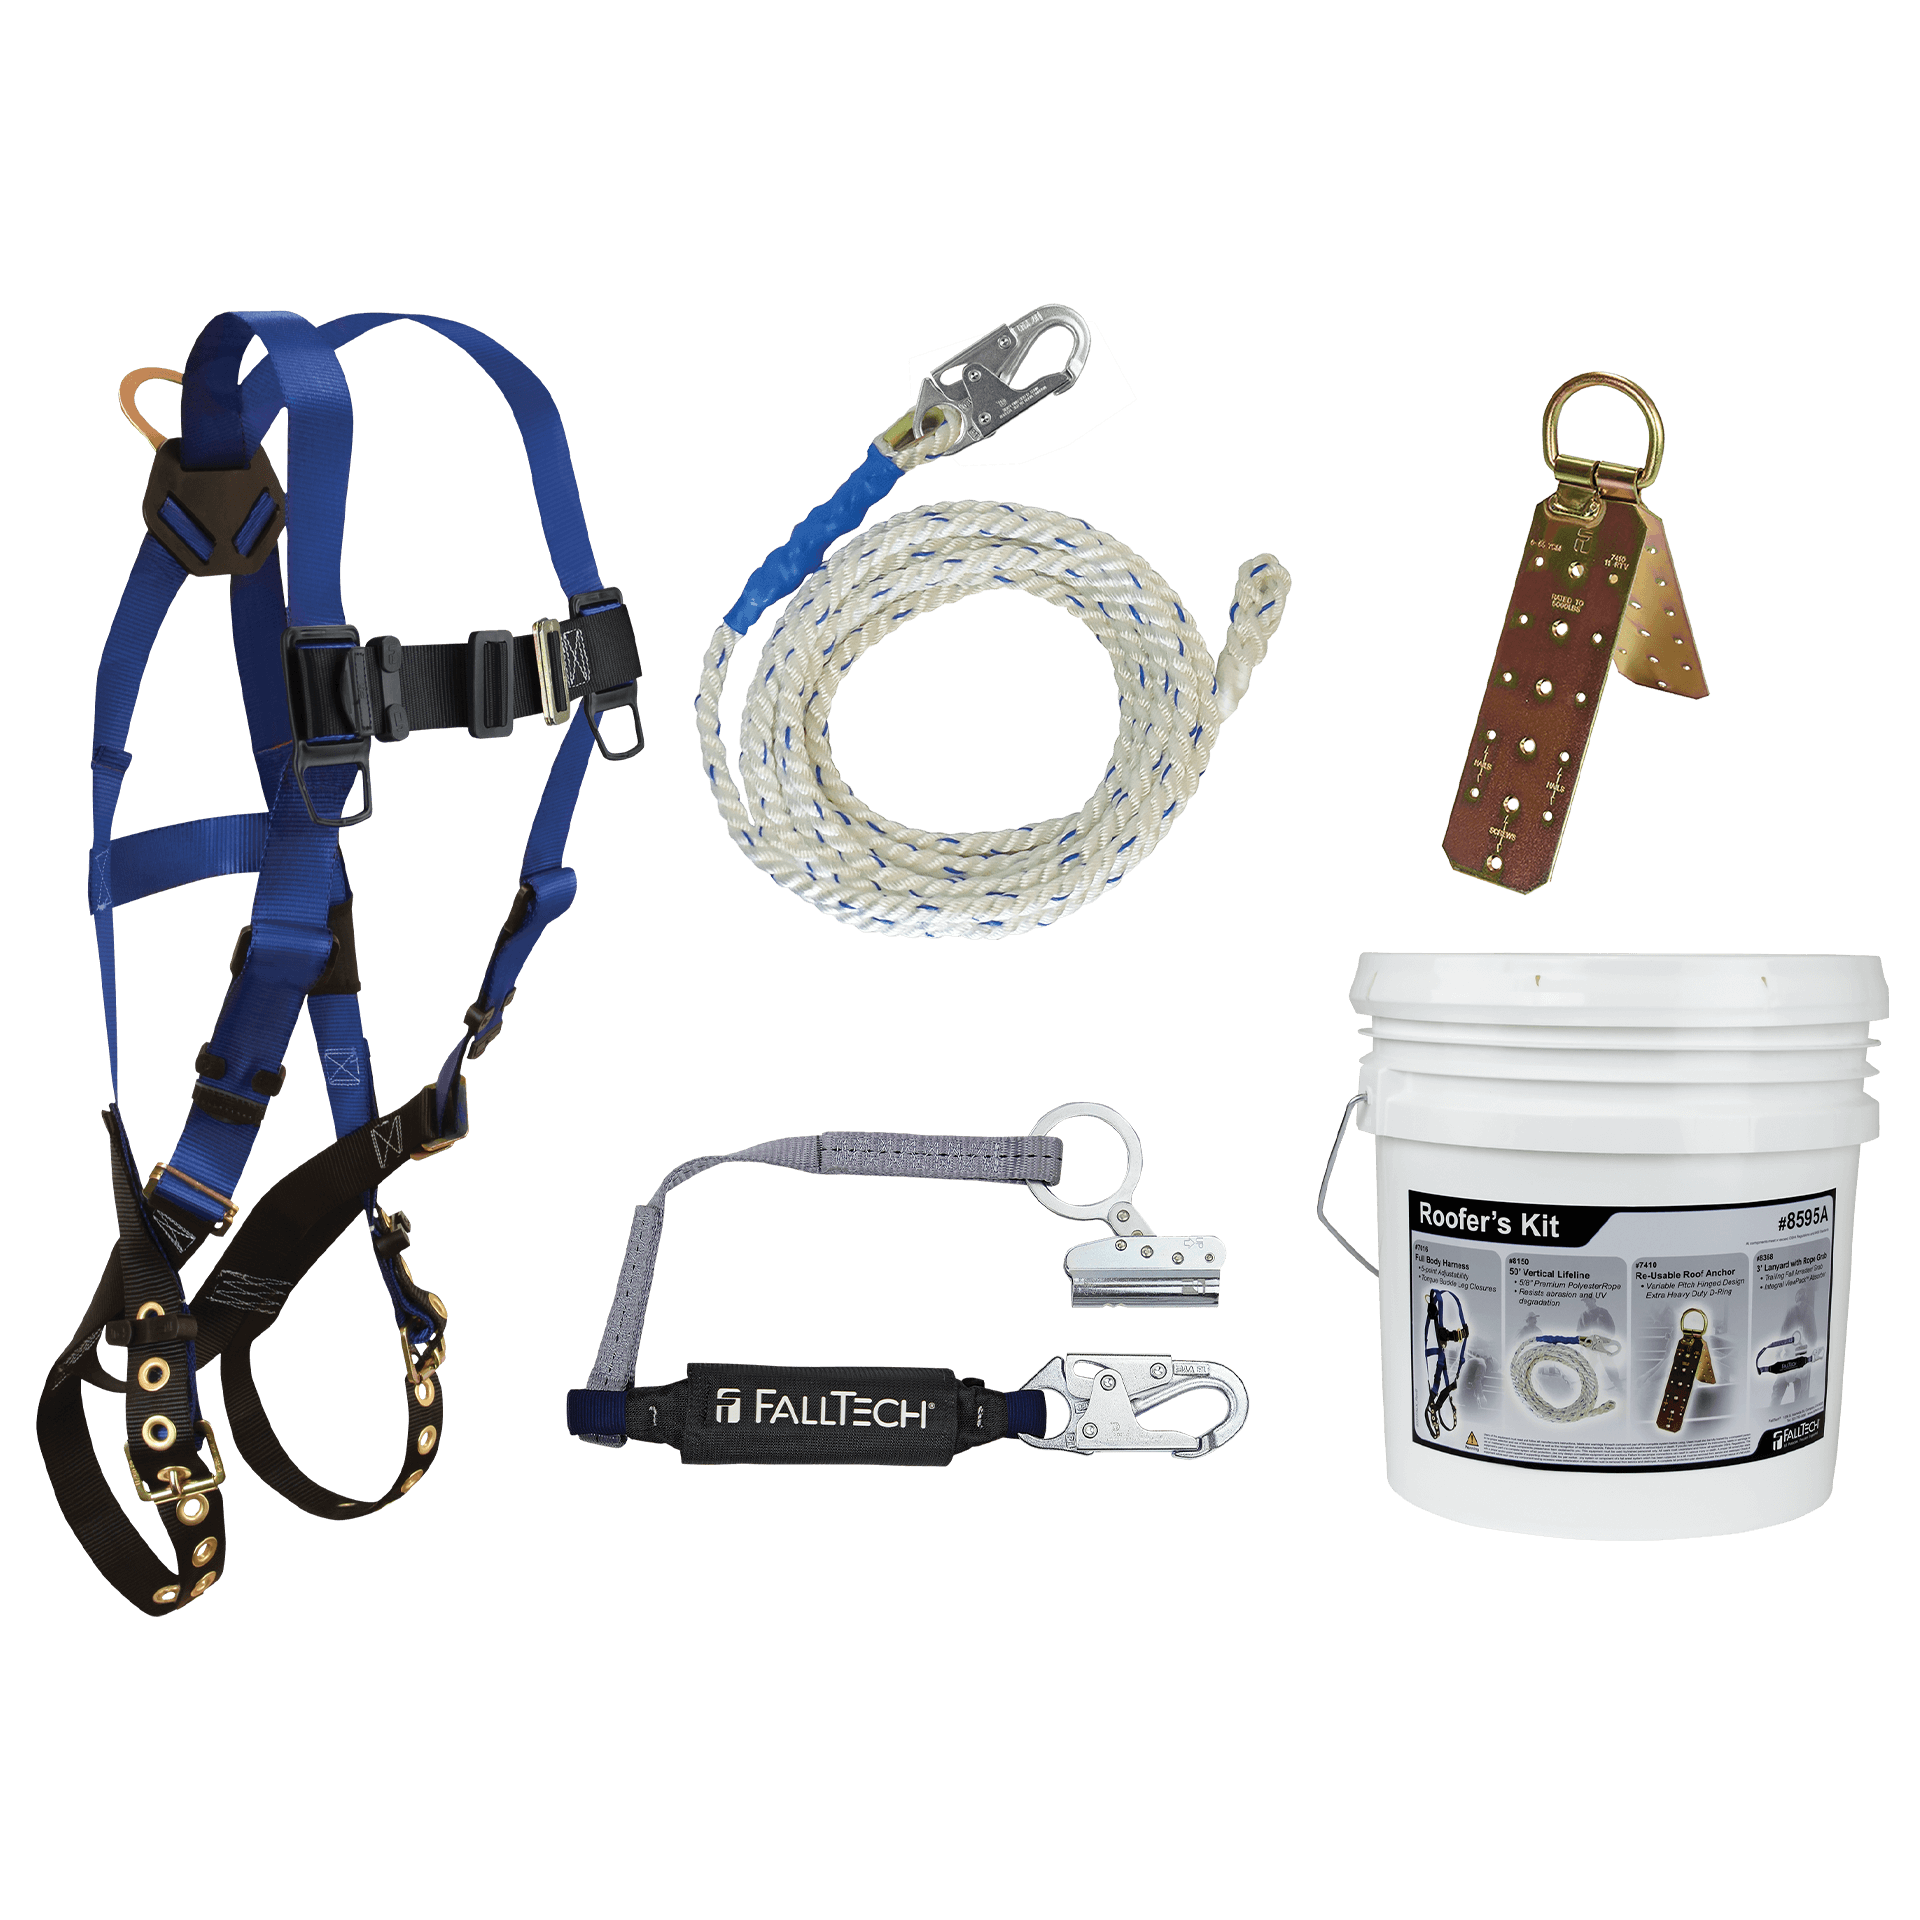 Roofers Kit Contractor Plus With 7016 S,M,L,  Tongue & Buckle Harness, 5 Gallon Pail with 50 Foot Lifeline, Rope Grabber with Lanyard, and Temporary Anchor